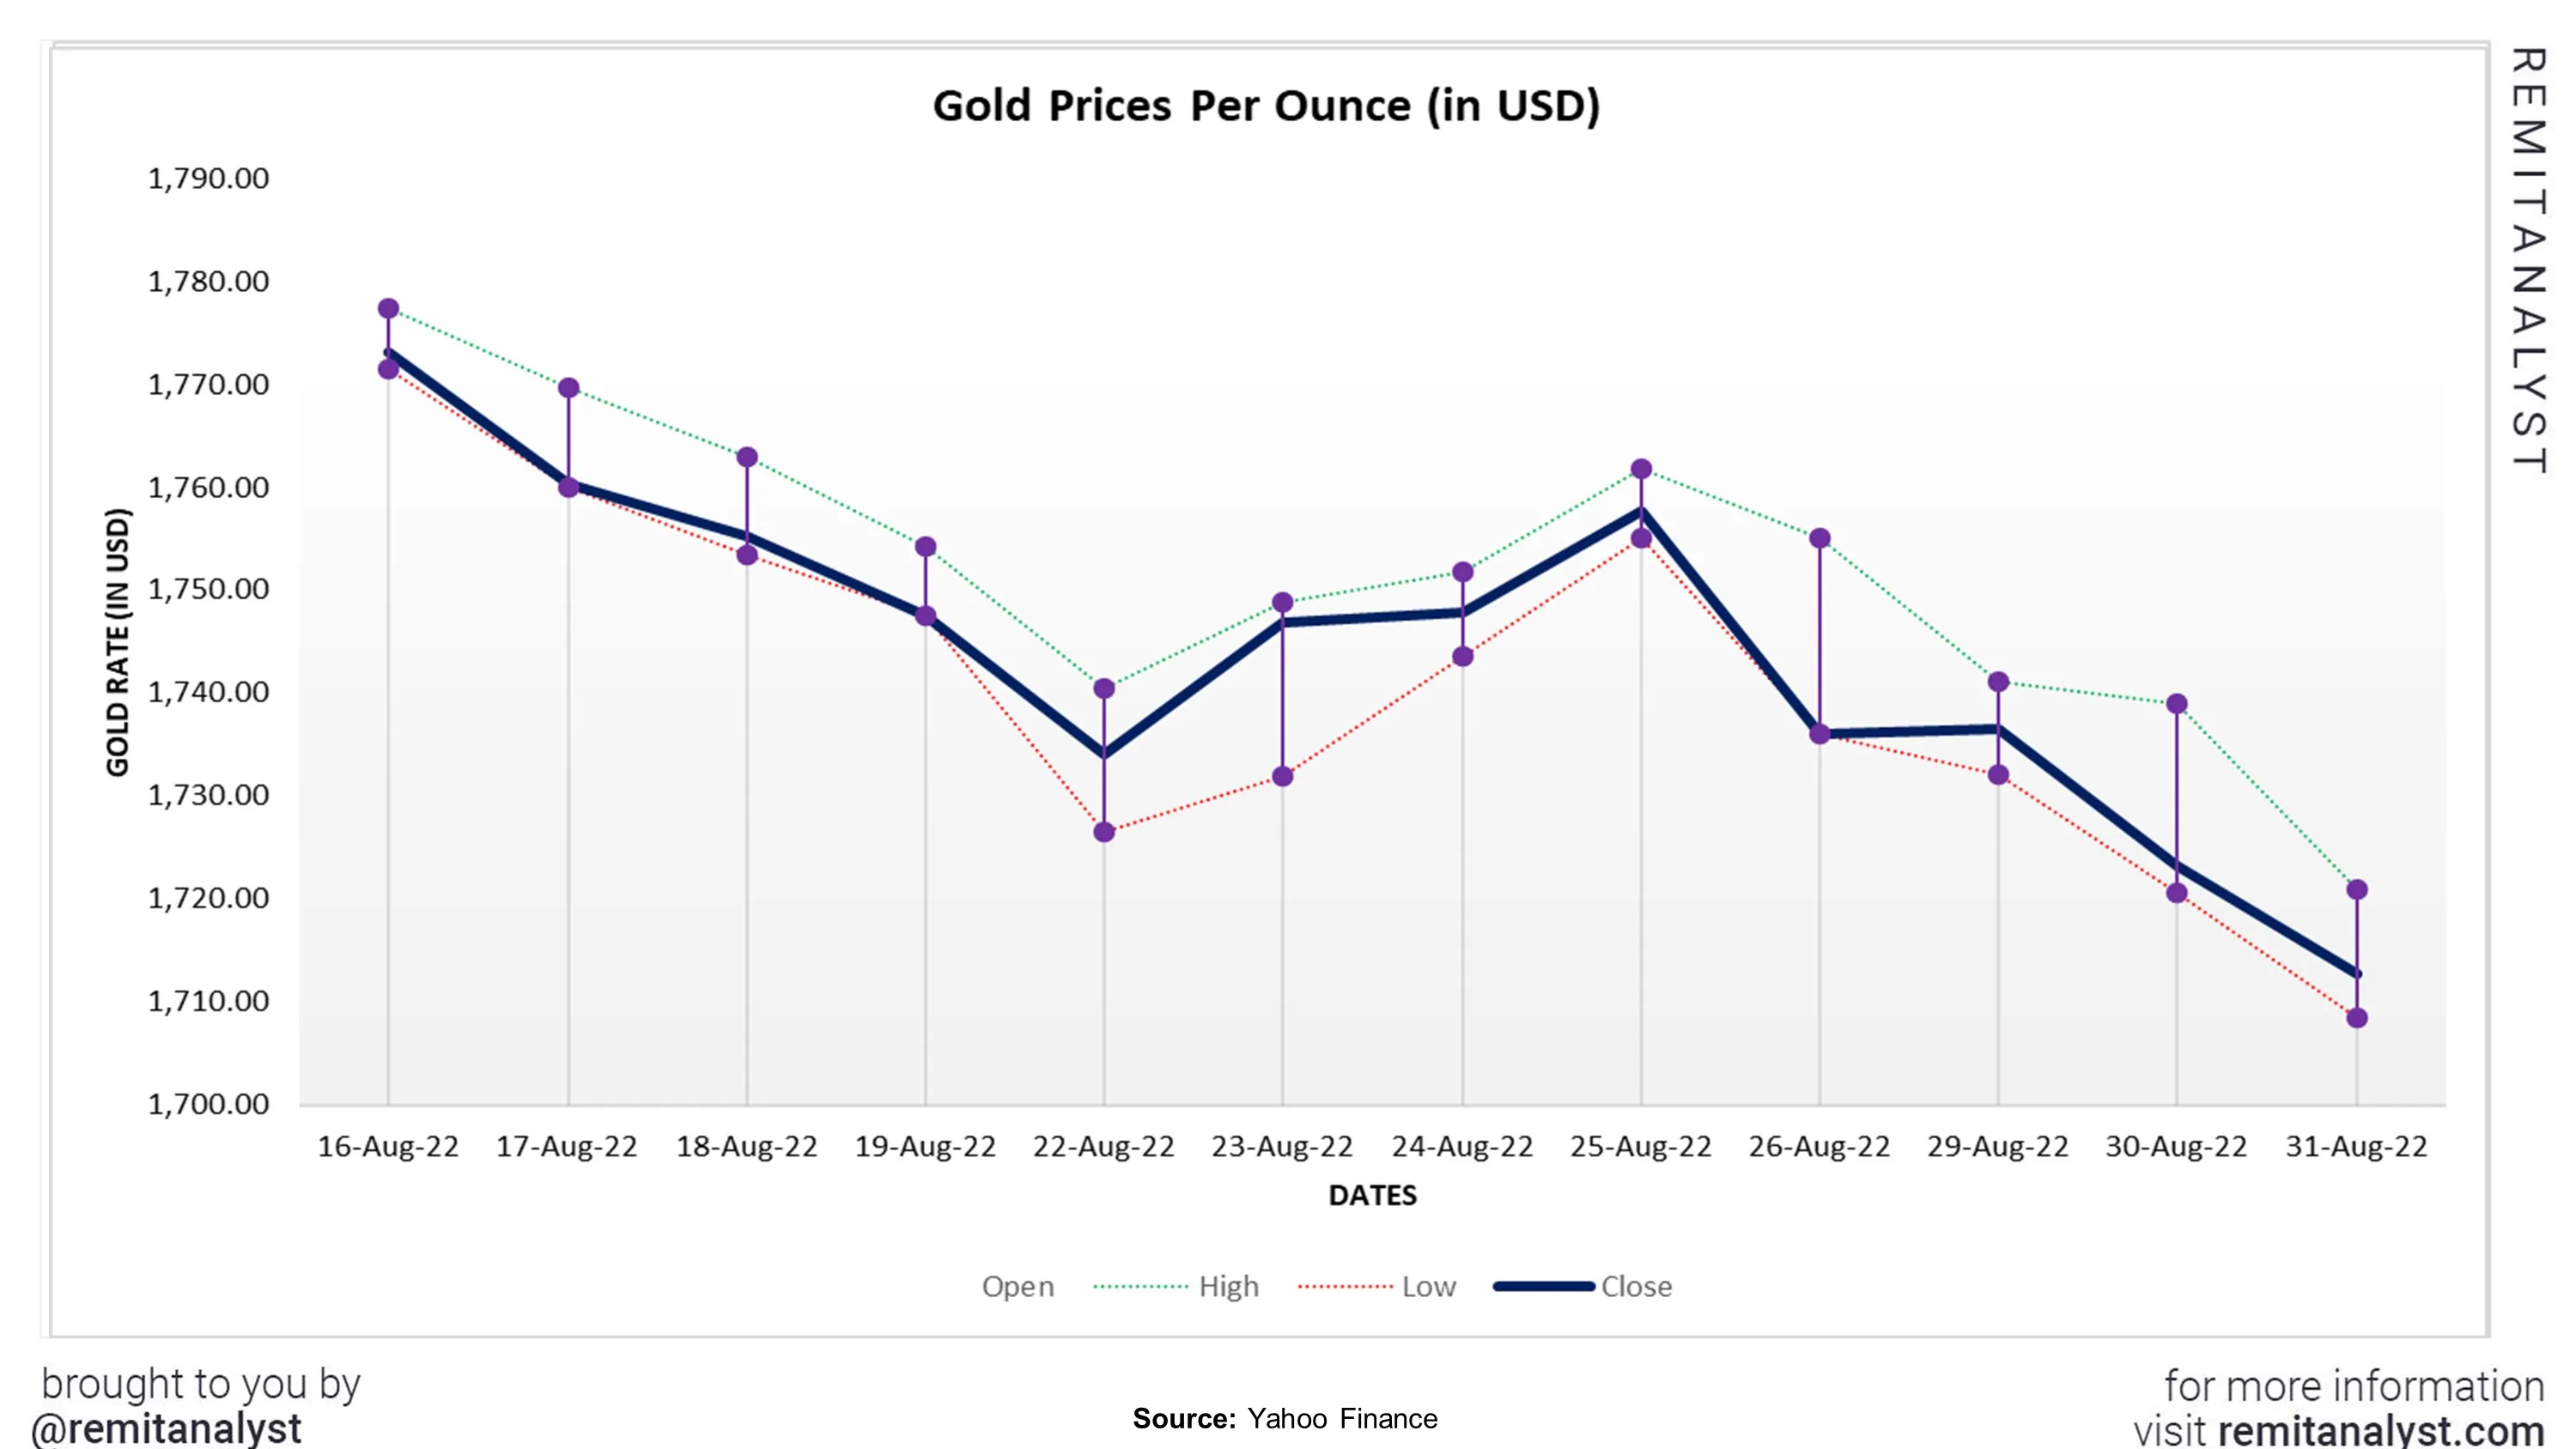 Gold-Prices-from-08-16-2022-to-08-31-2022